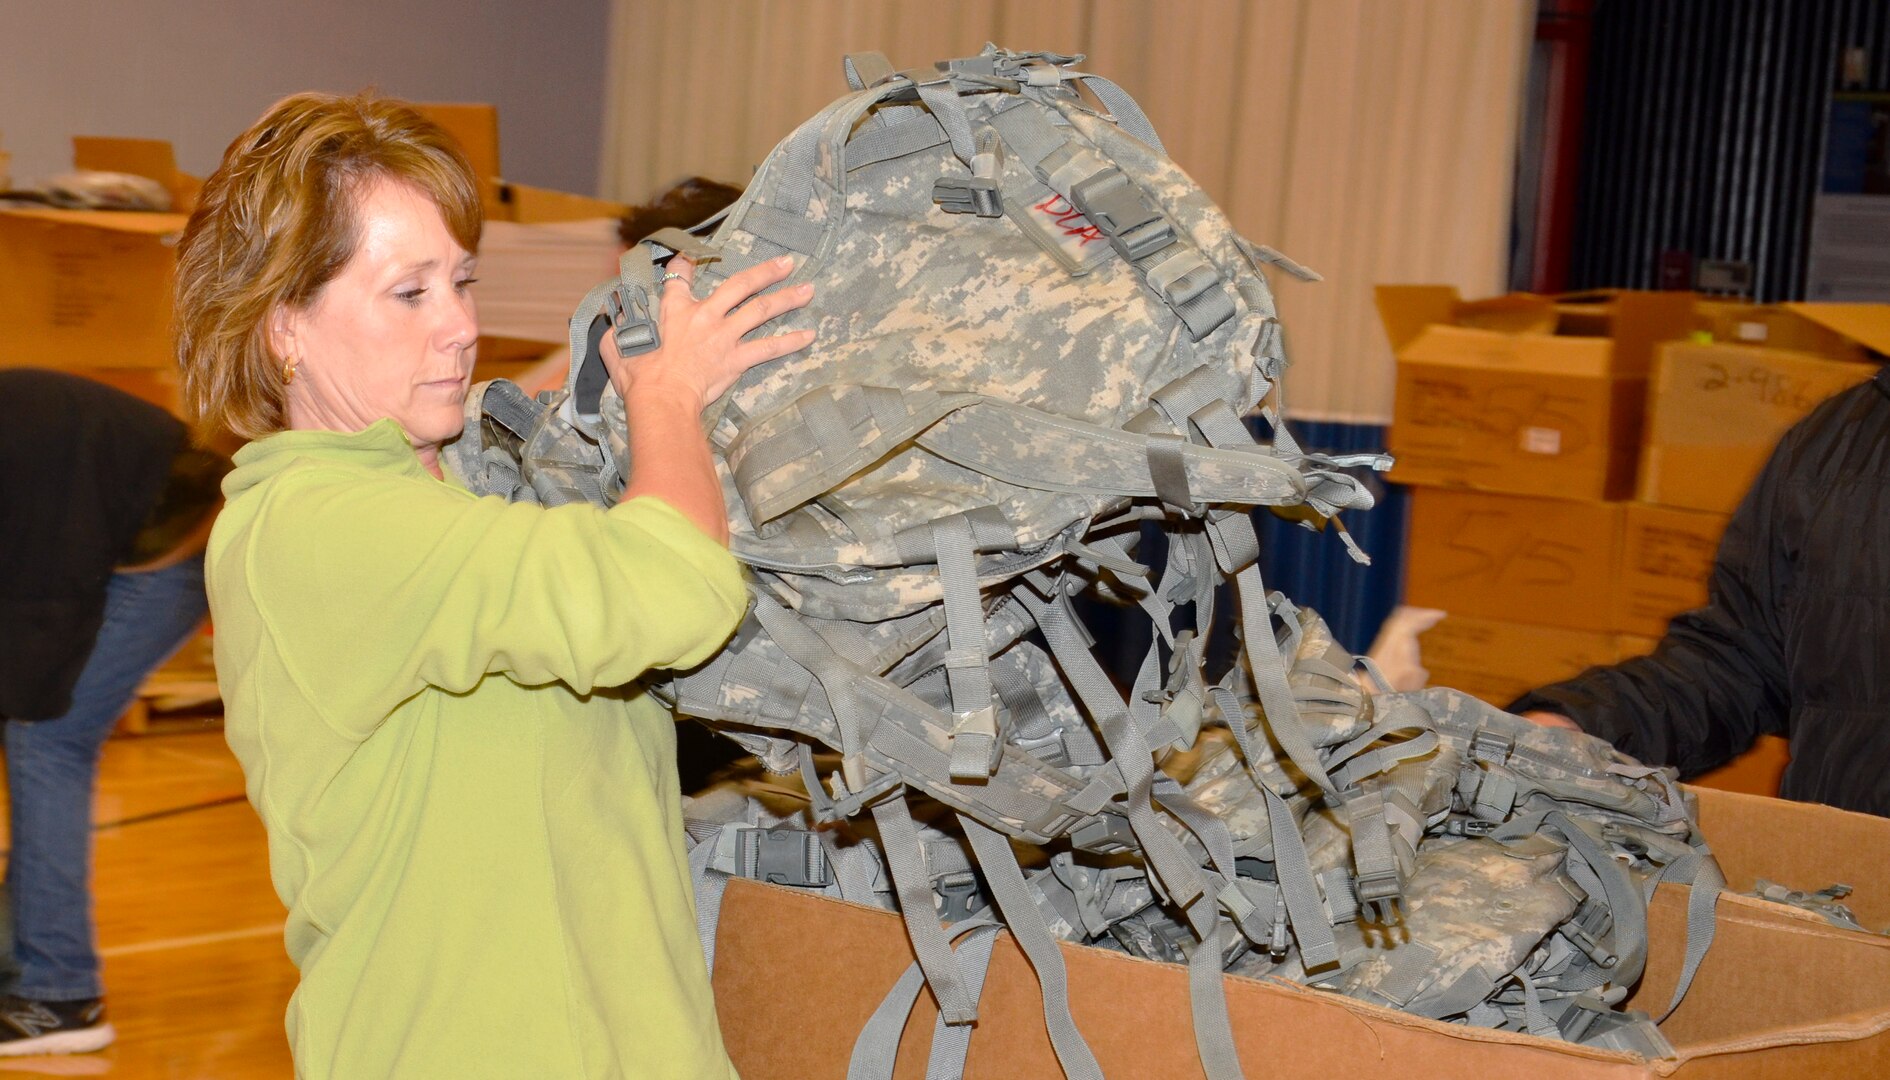 Lisa Grenon, of the Department of Veterans Affairs and the Veteran’s Affairs Medical Center in Battle Creek, Michigan organizes backpacks from DLA Disposition Services for the annual Veterans Stand-down event.